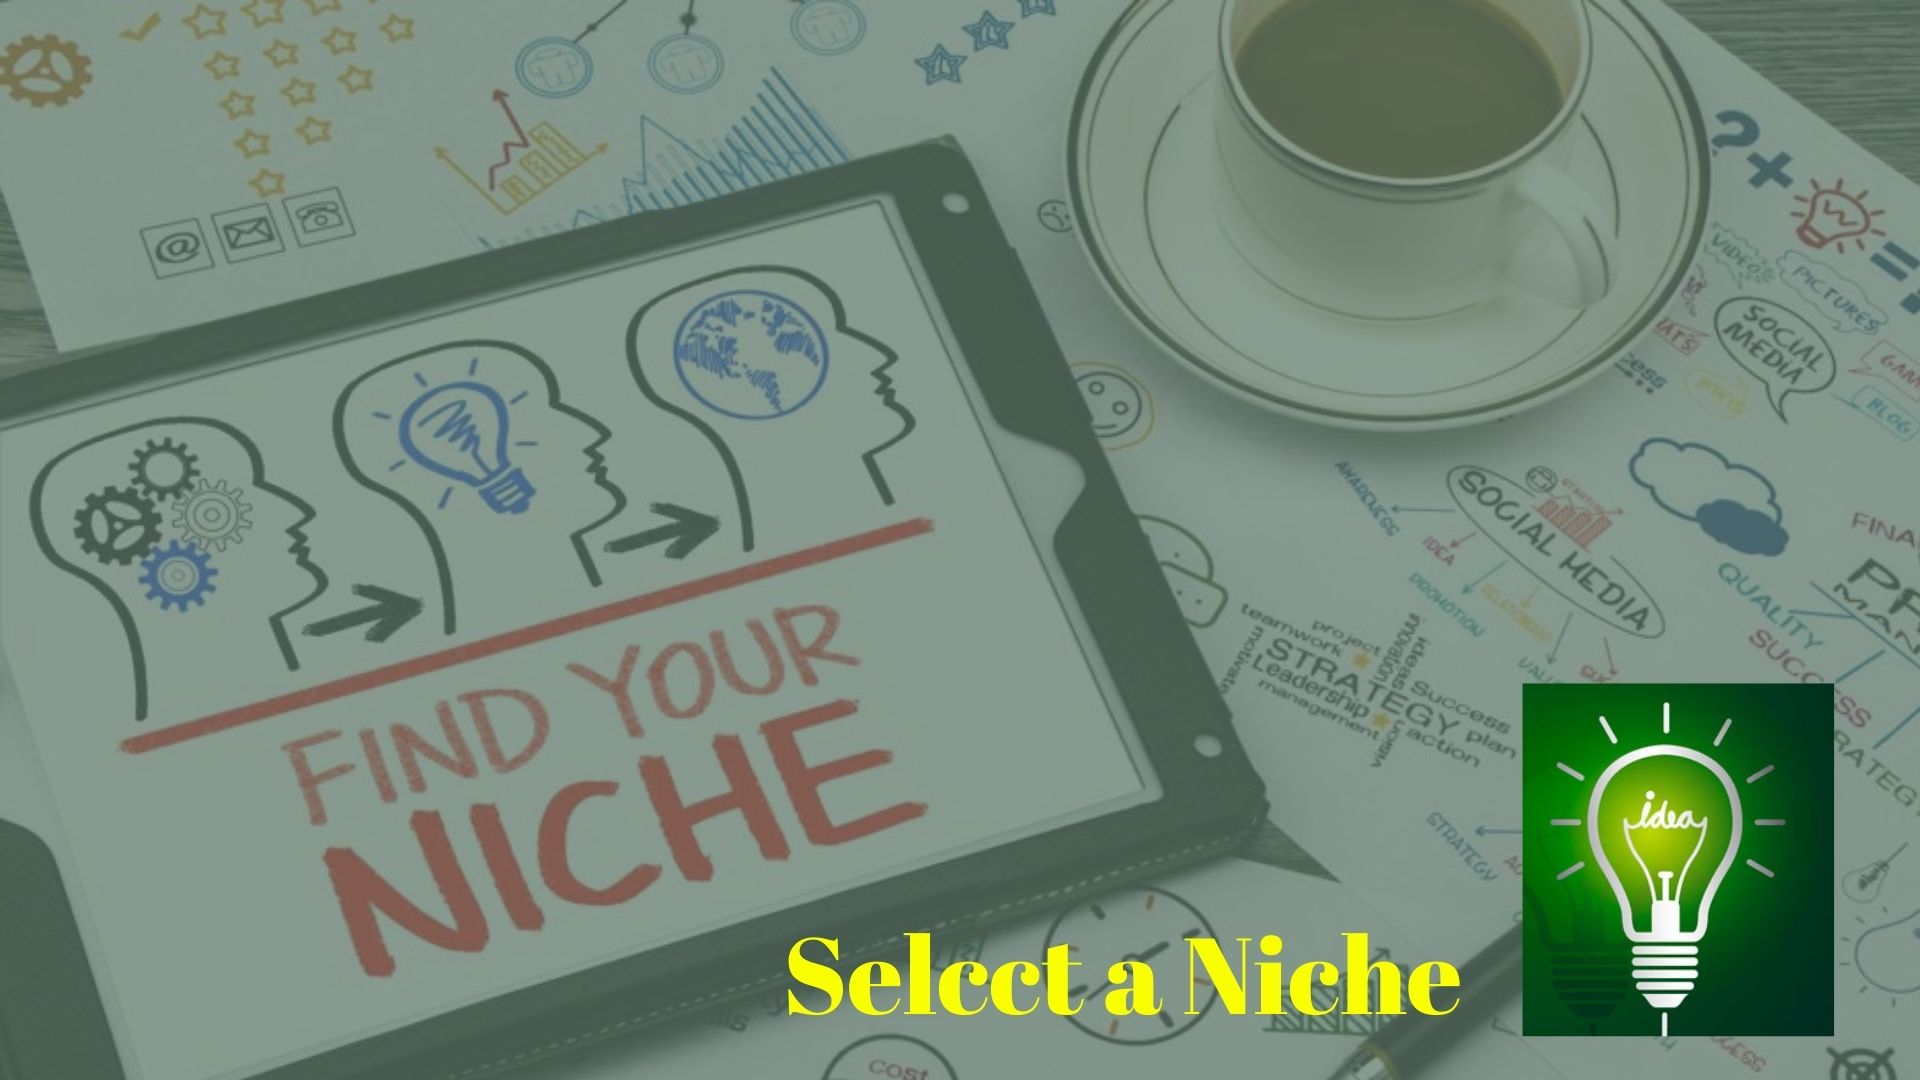 Selecting a Niche for eCommerce